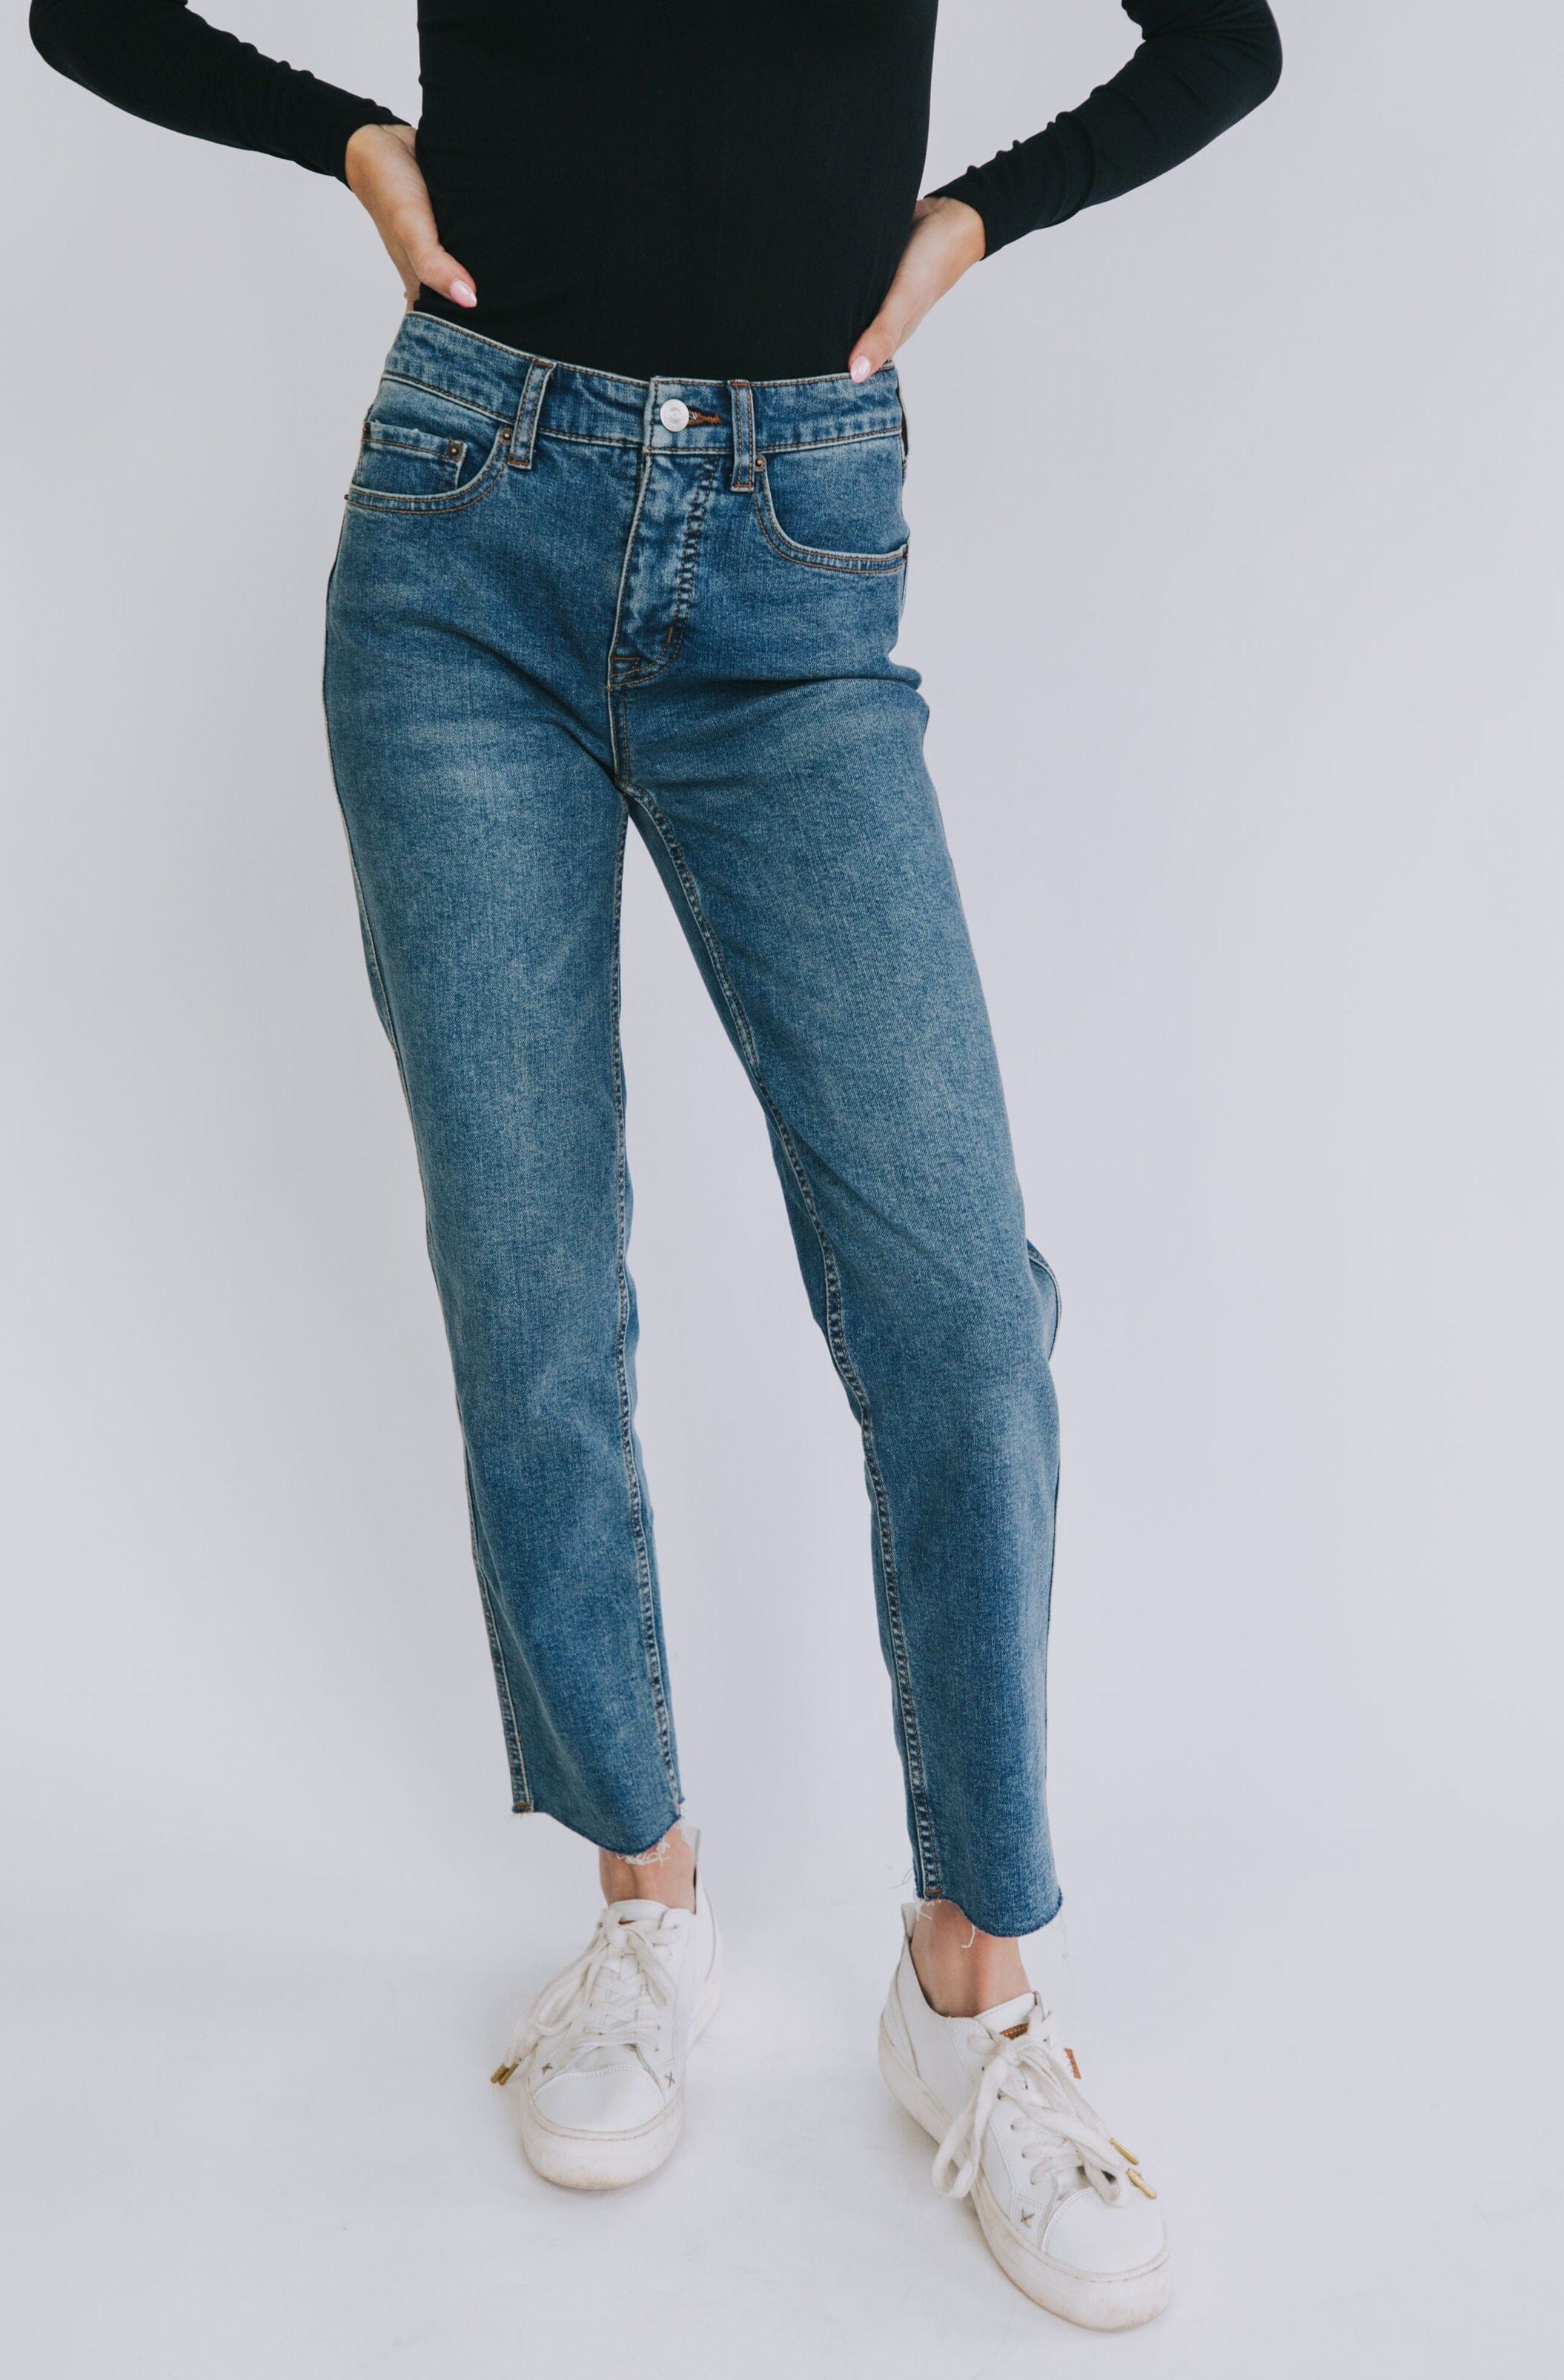 FREE PEOPLE - CRVY High-Rise Vintage Straight Jeans 